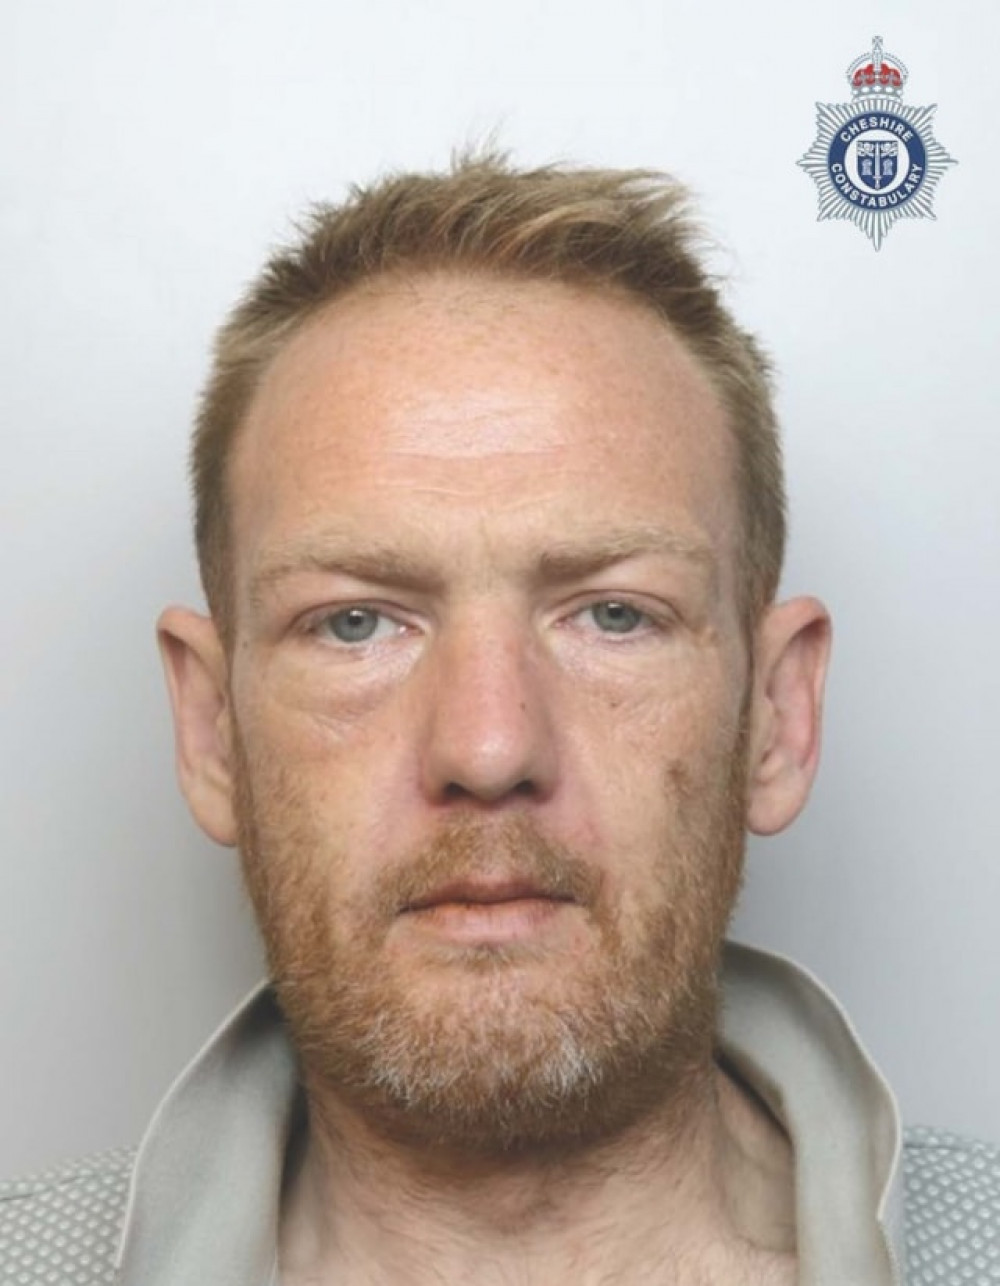 Christopher Russell, also known as Christopher Sedgley, was issued with a three-year Criminal Behaviour Order (CBO) at Chester Magistrates' Court yesterday (Monday 22nd April). (Photo: Cheshire Police)